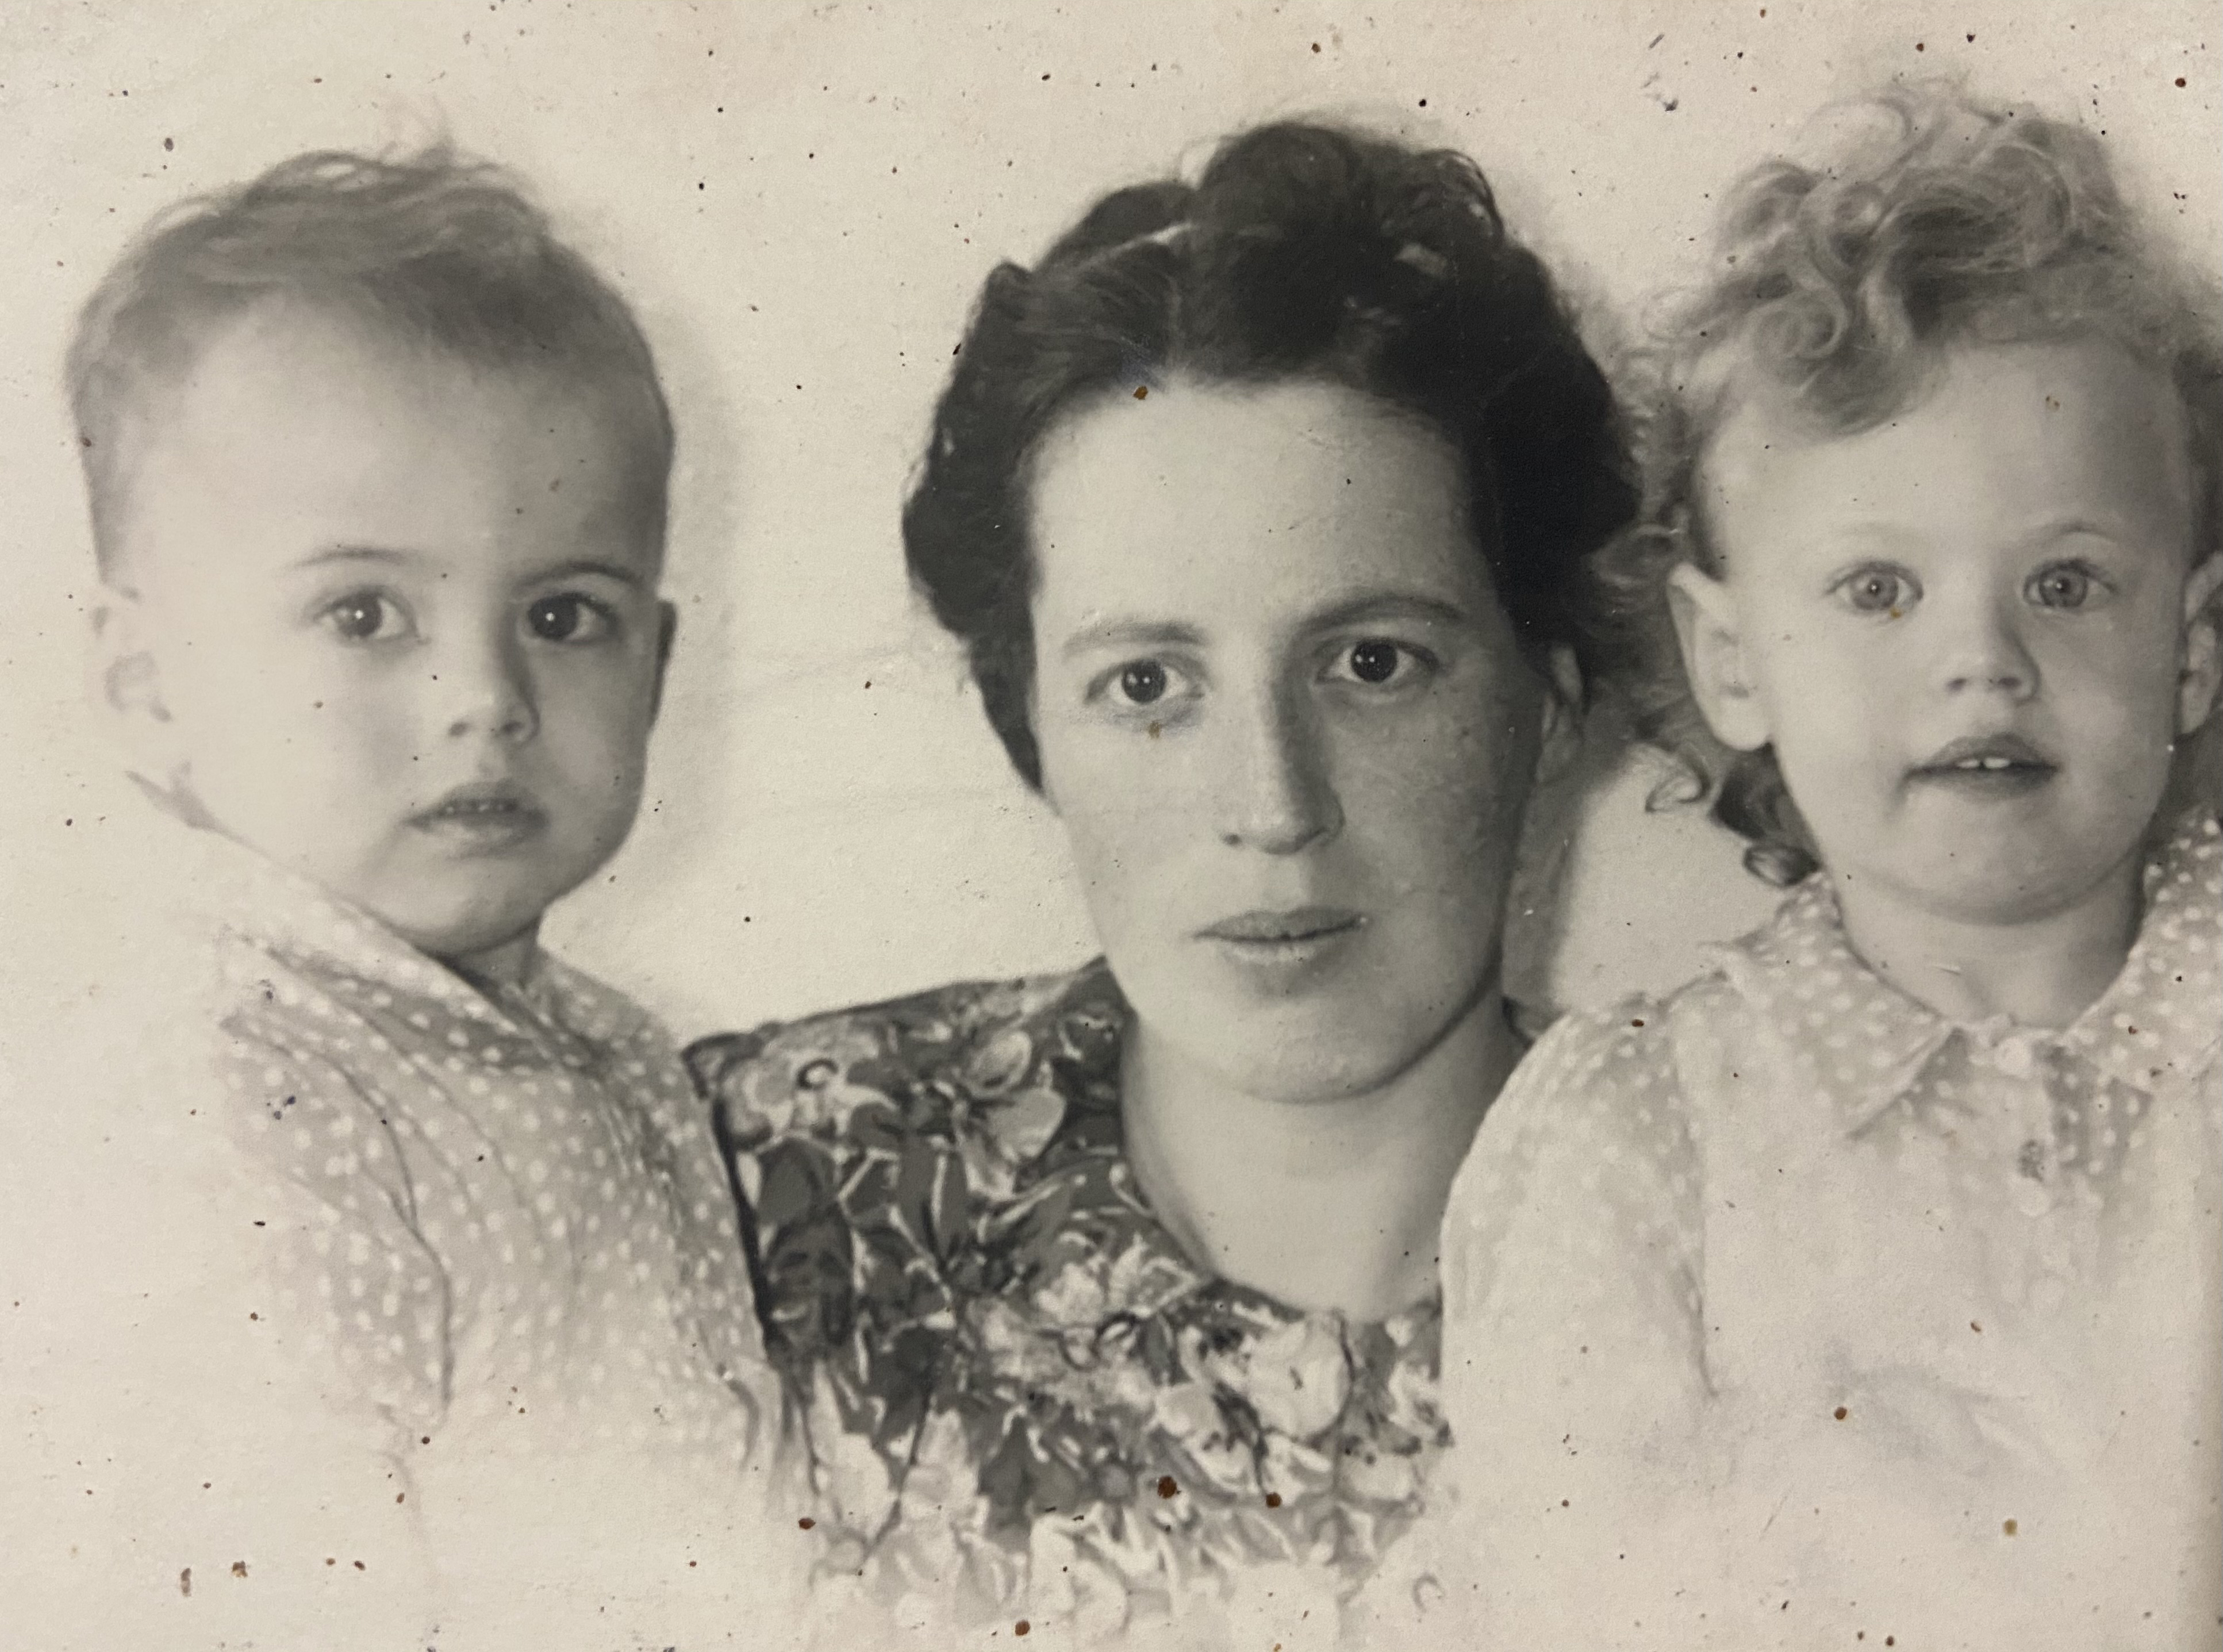 Rosa de Leeuw Kress with her son Shaul and his twin sister Ada. This photo was taken during the war.